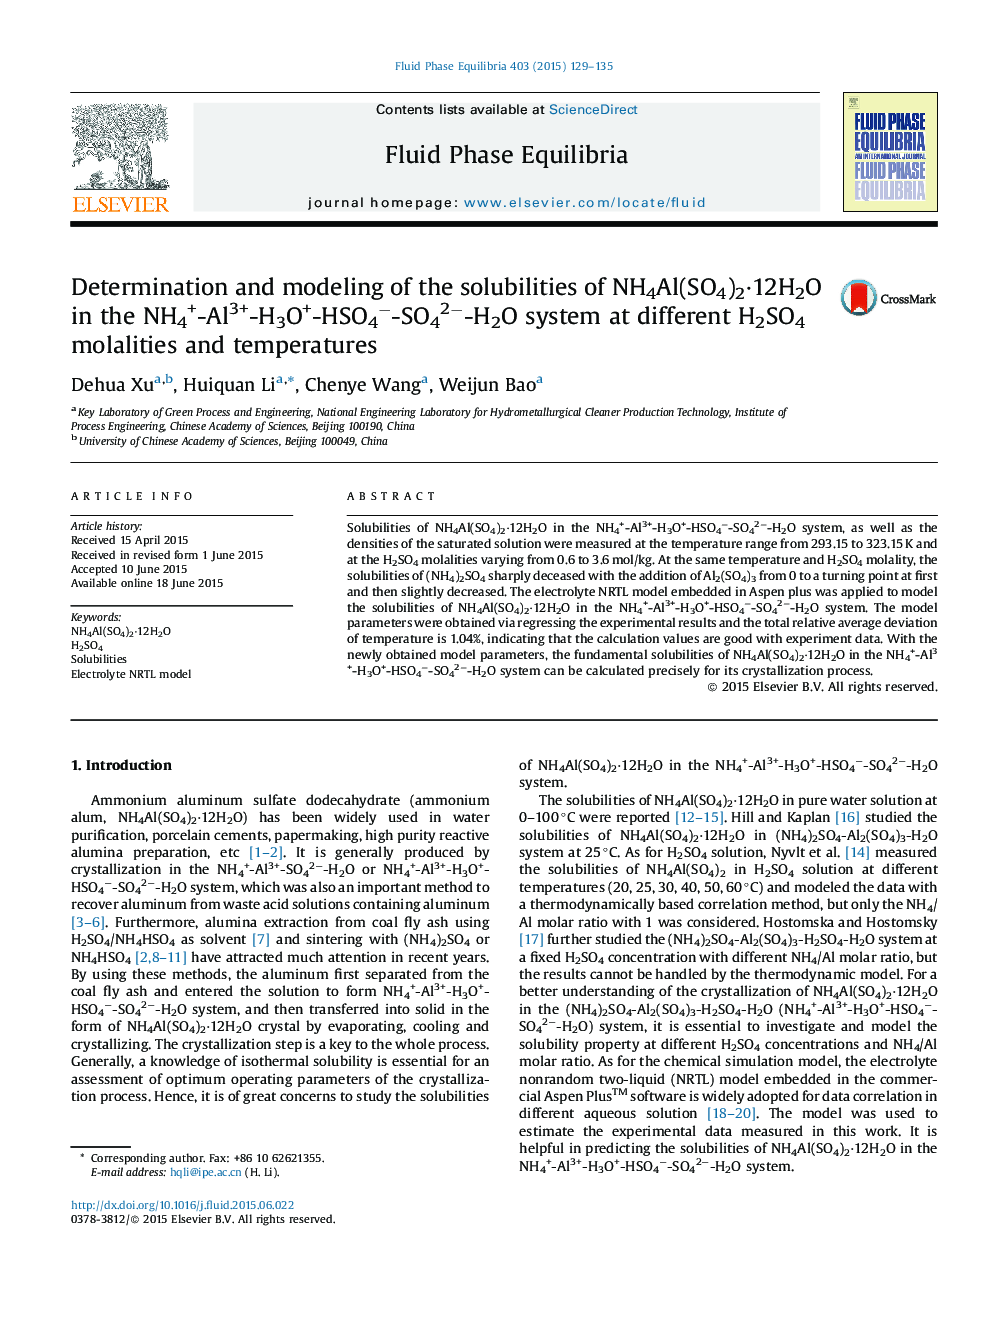 Determination and modeling of the solubilities of NH4Al(SO4)2·12H2O in the NH4+-Al3+-H3O+-HSO4−-SO42−-H2O system at different H2SO4 molalities and temperatures